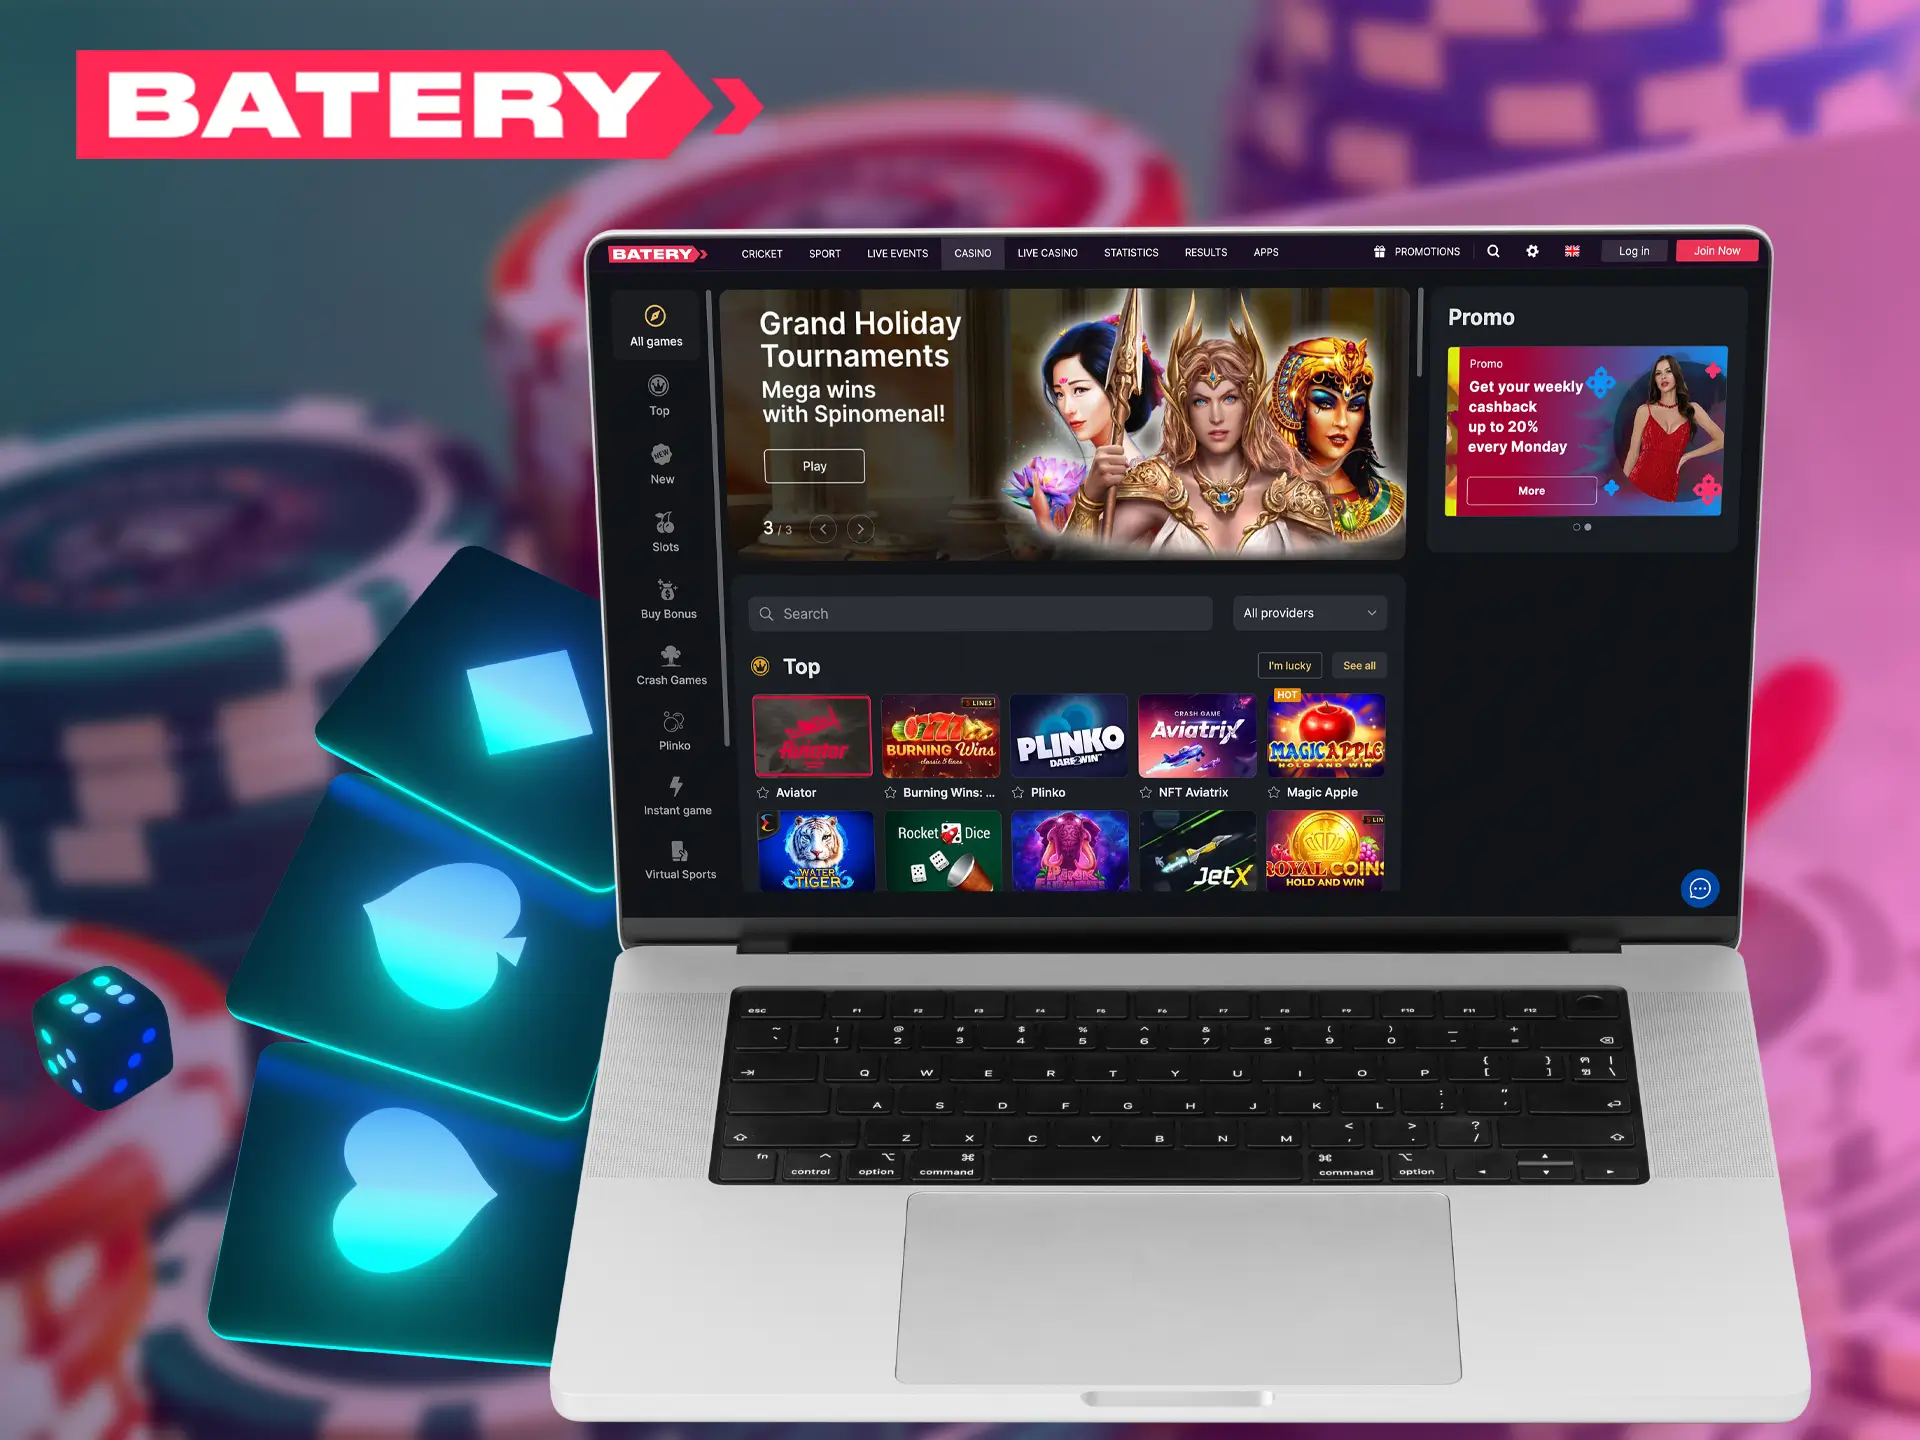 The variety of gaming options allows the player not to get bored at Batery Casino.